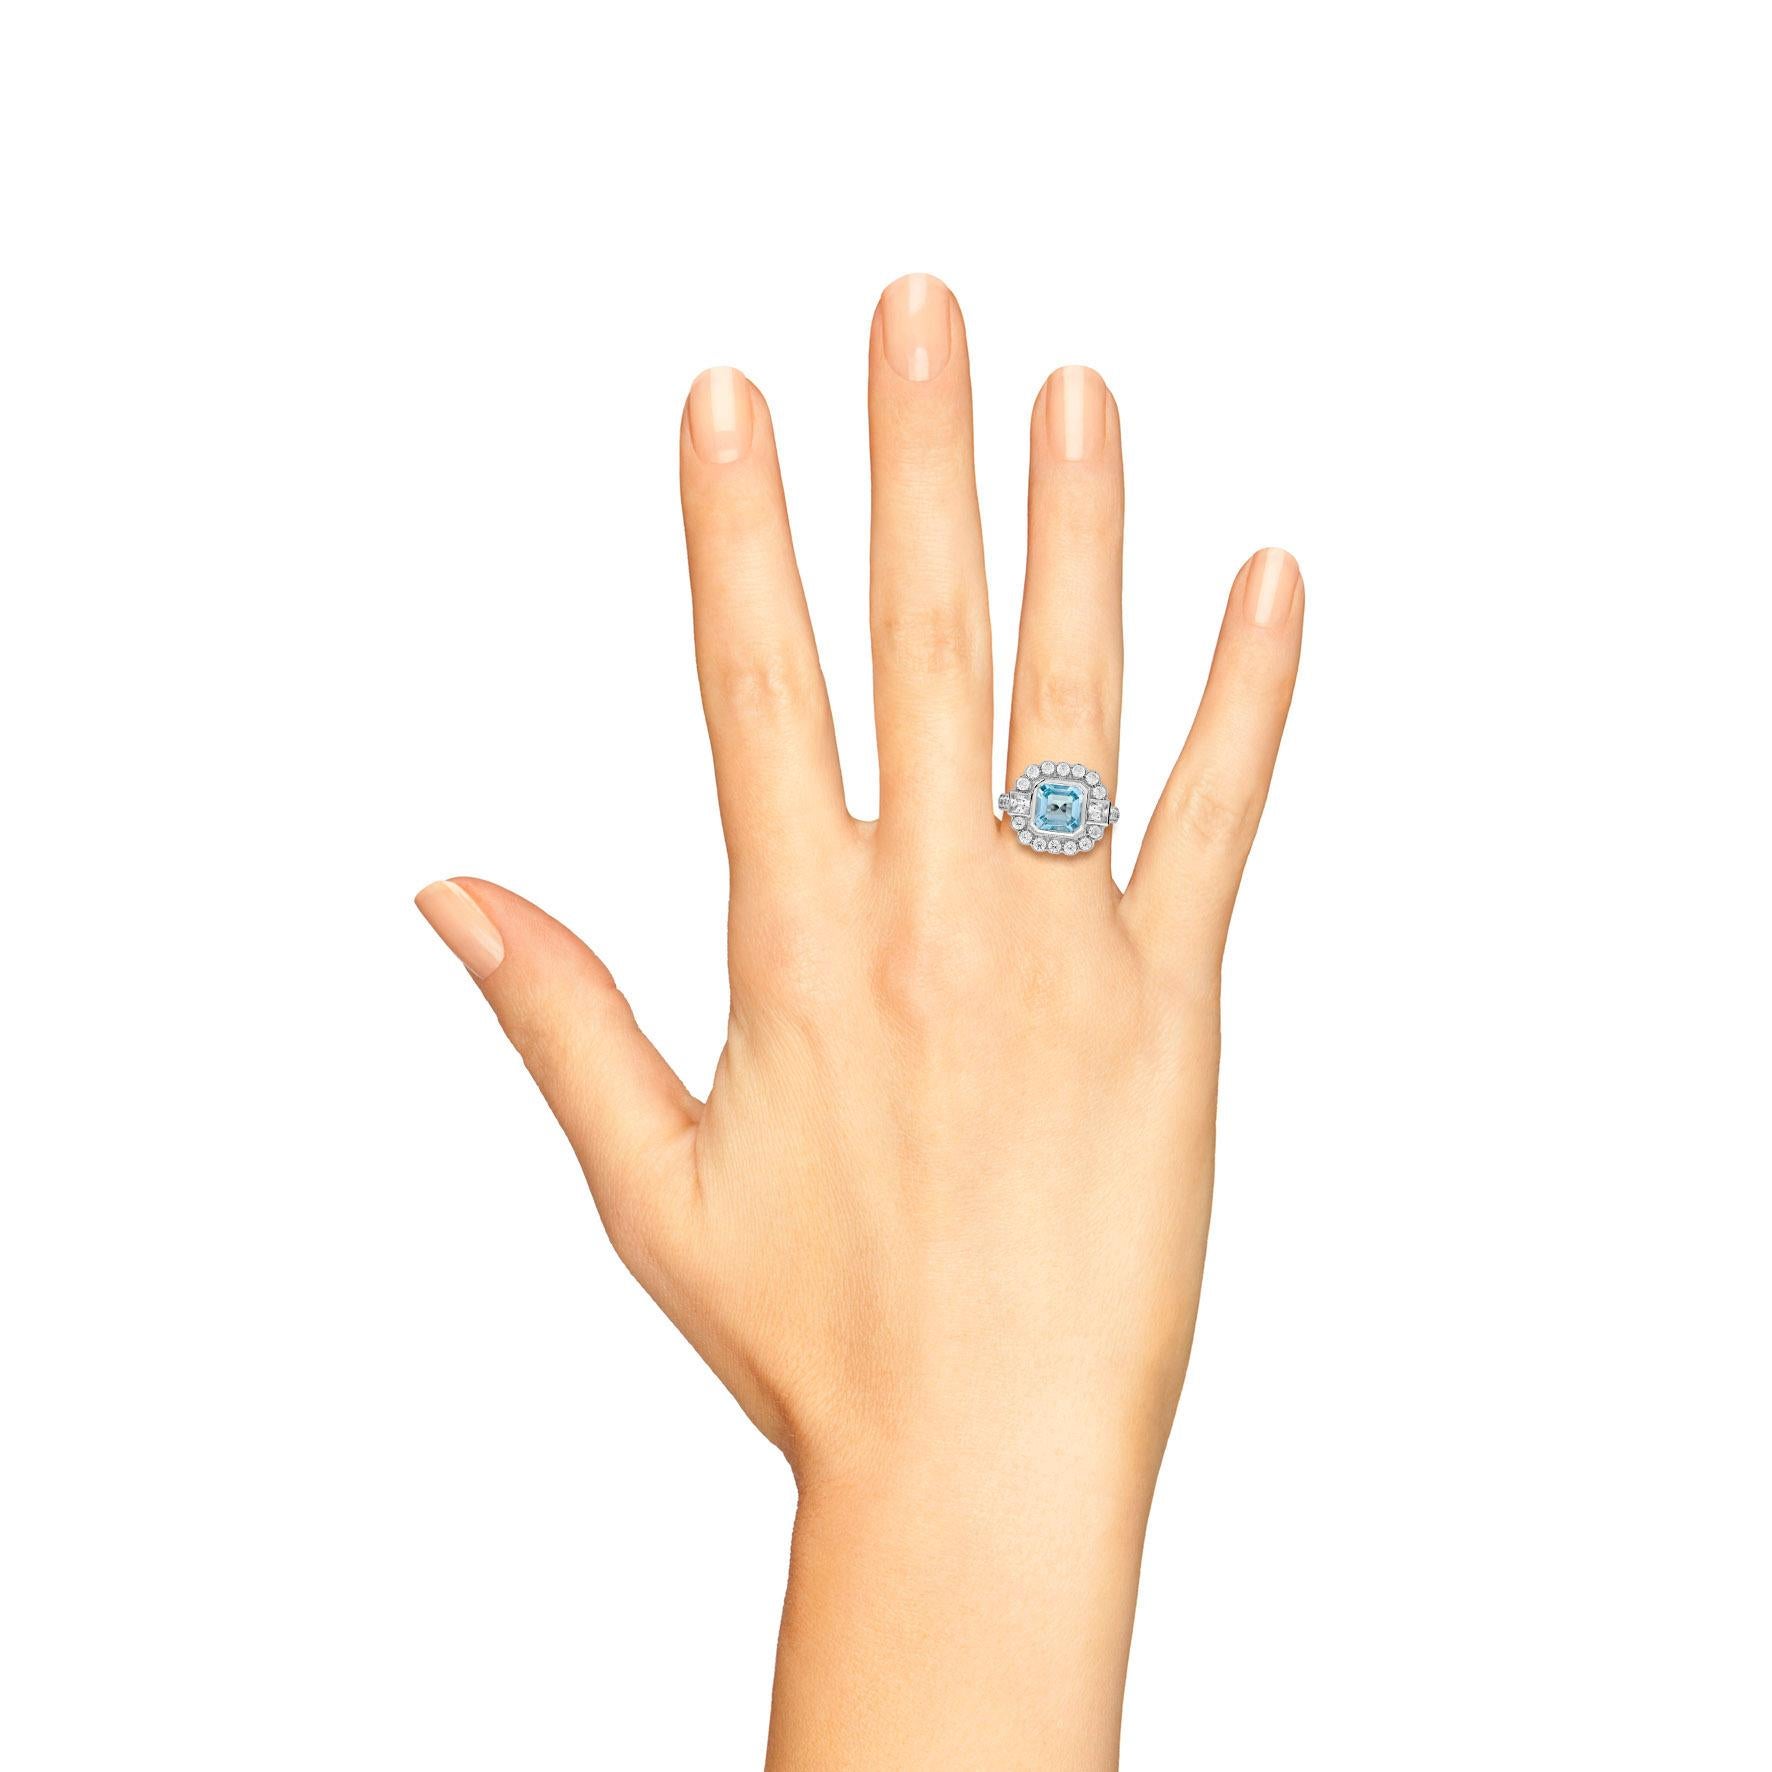 Showcases a central 2.5 carat Asscher cut aquamarine, this ring is crafted in 18k white gold with the approximately 1.08 carat diamond accents. Add this stunning aquamarine and diamond ring to your jewelry collection. Wear it to any fancy affair and